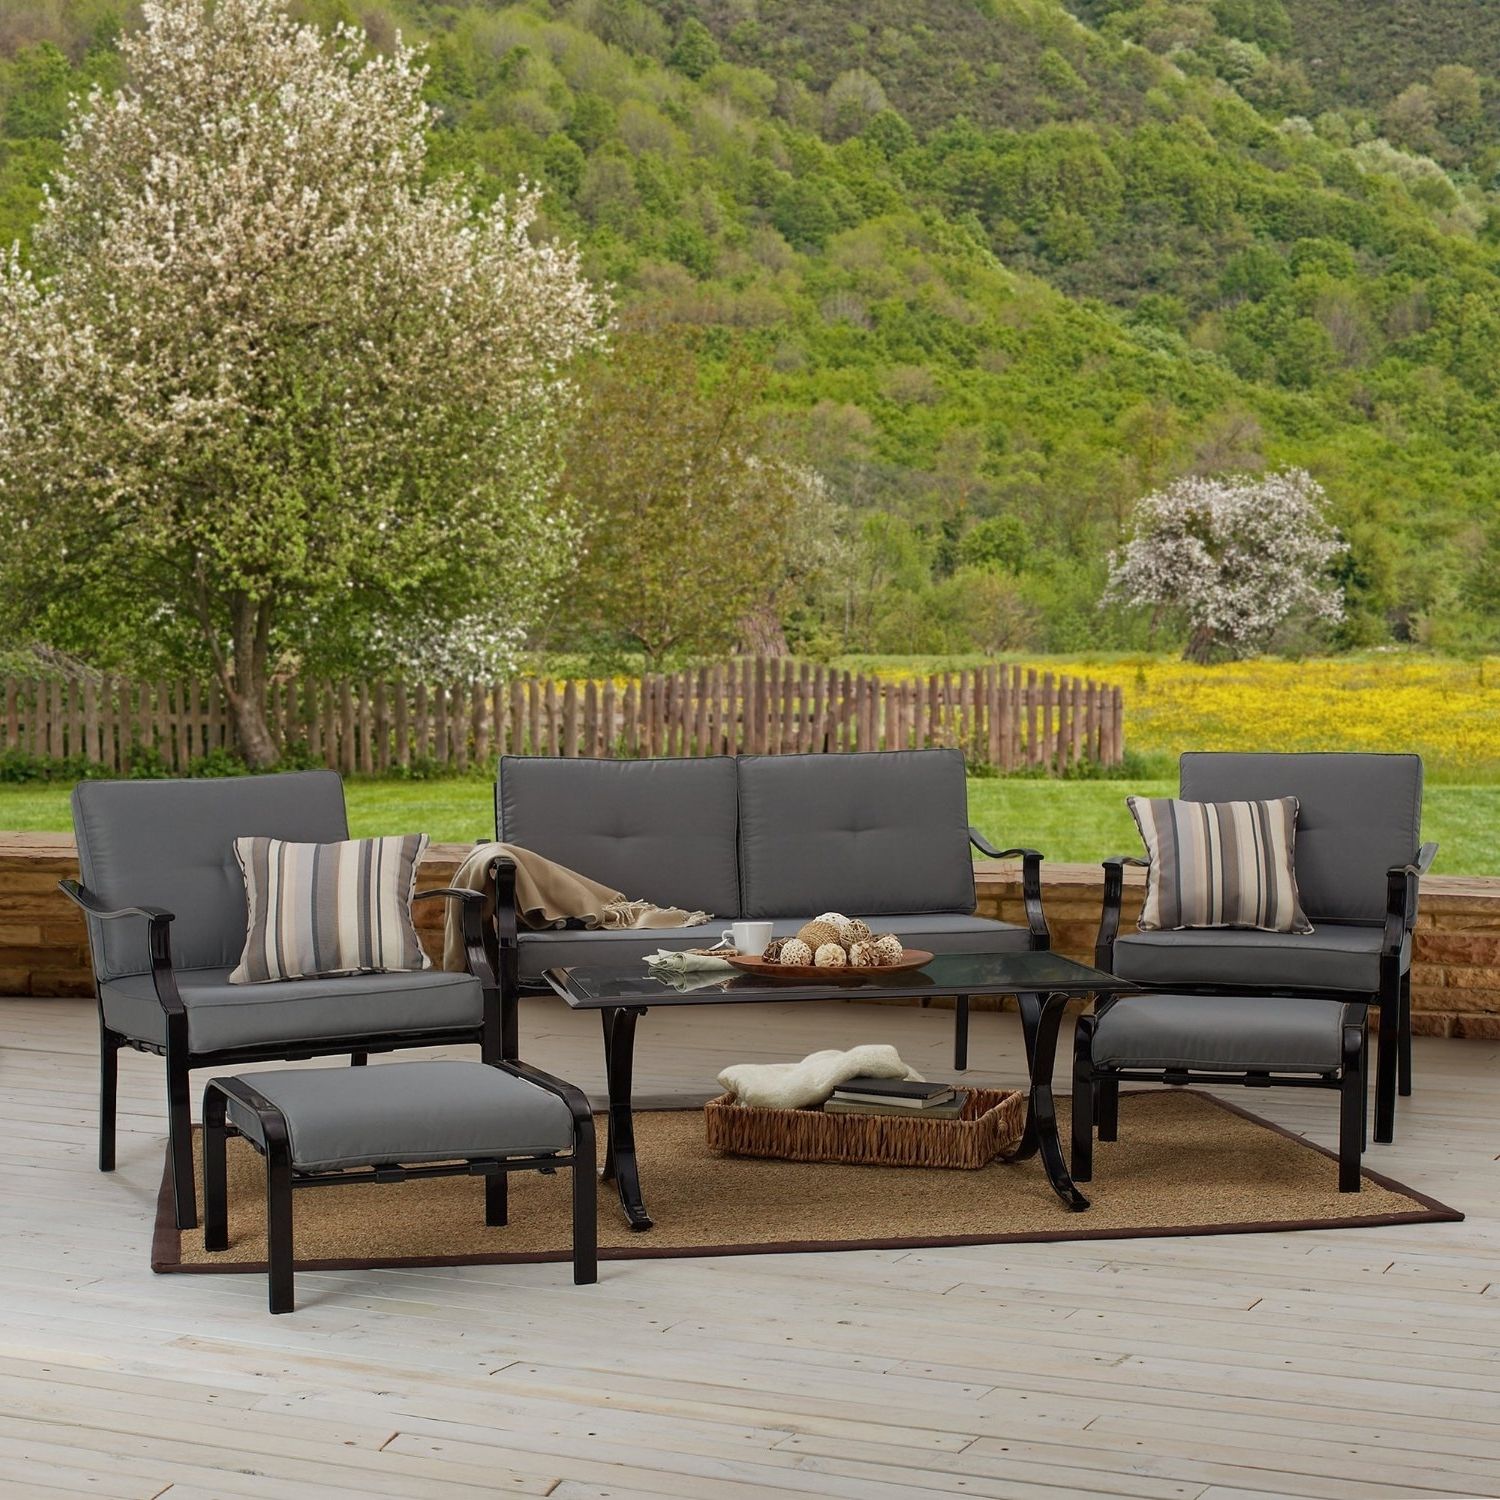 Where To Buy Outdoor Patio Conversation Sets For Under $500 Within Latest Patio Conversation Sets Under $500 (Photo 1 of 15)